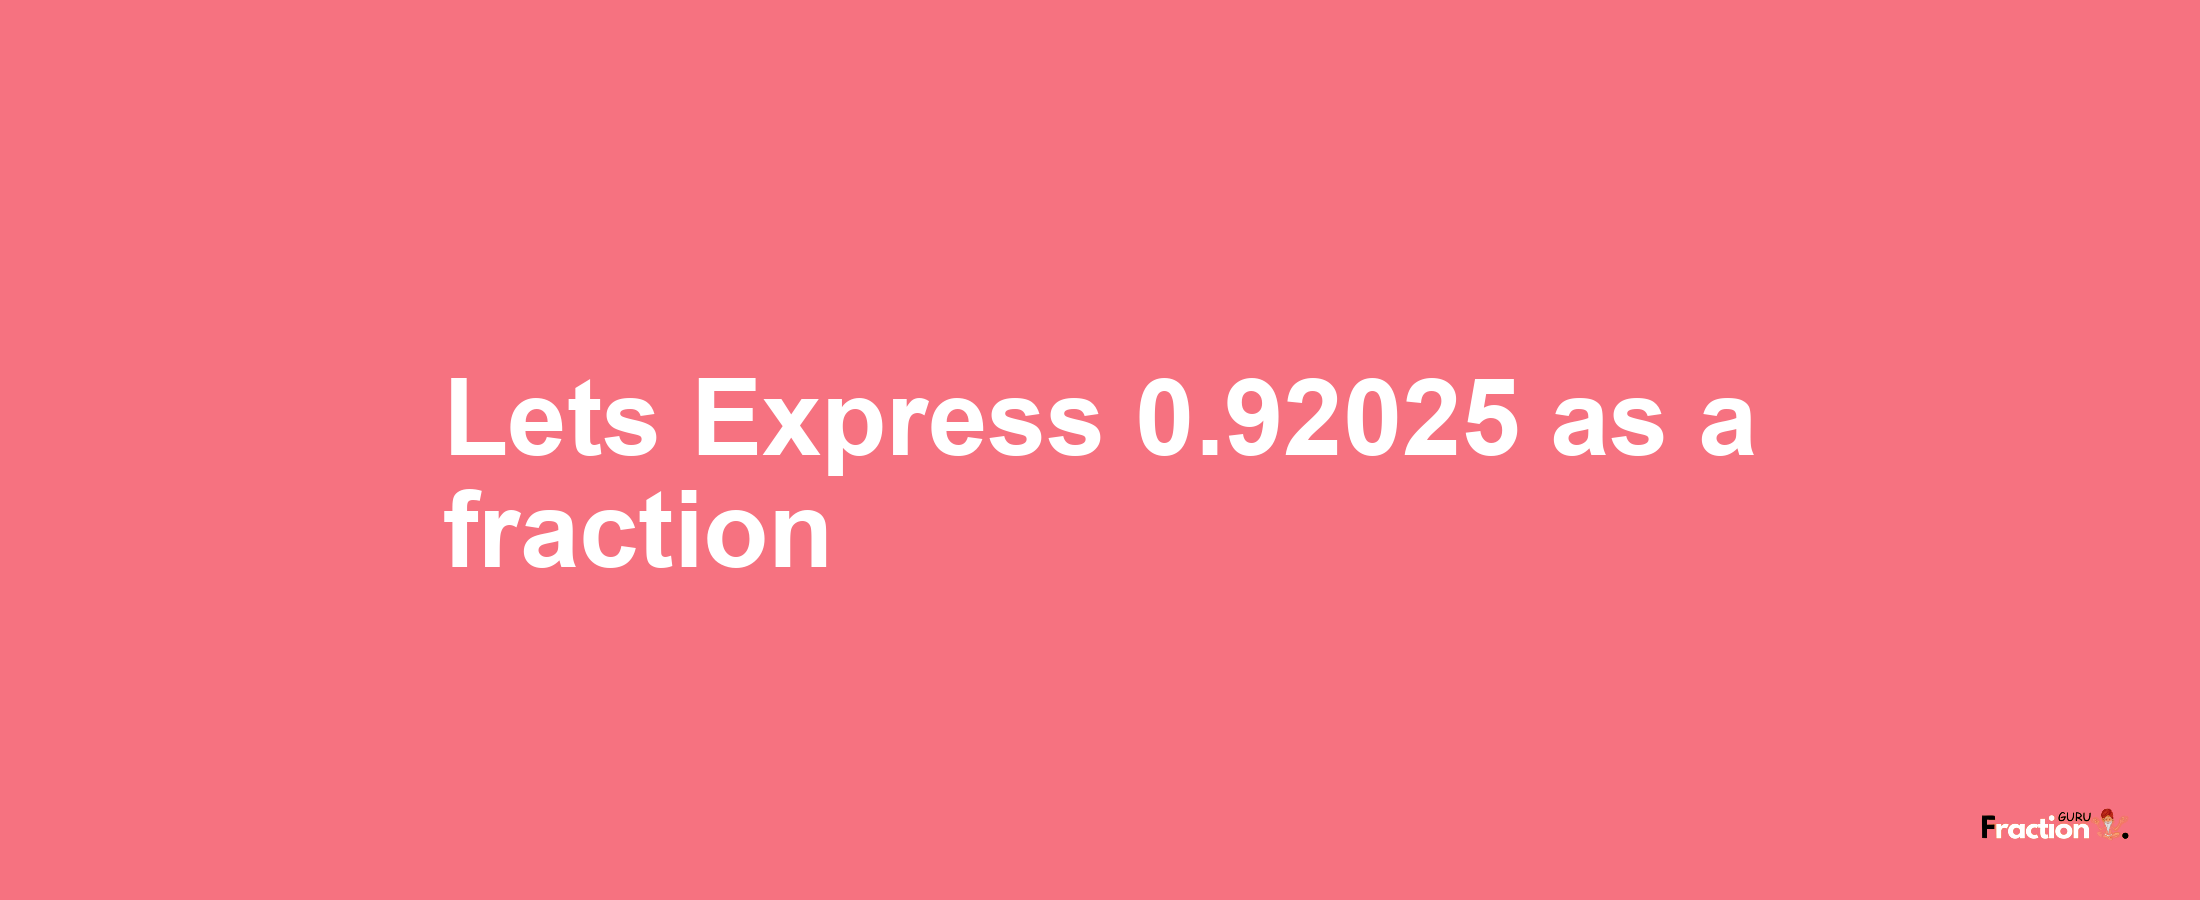 Lets Express 0.92025 as afraction